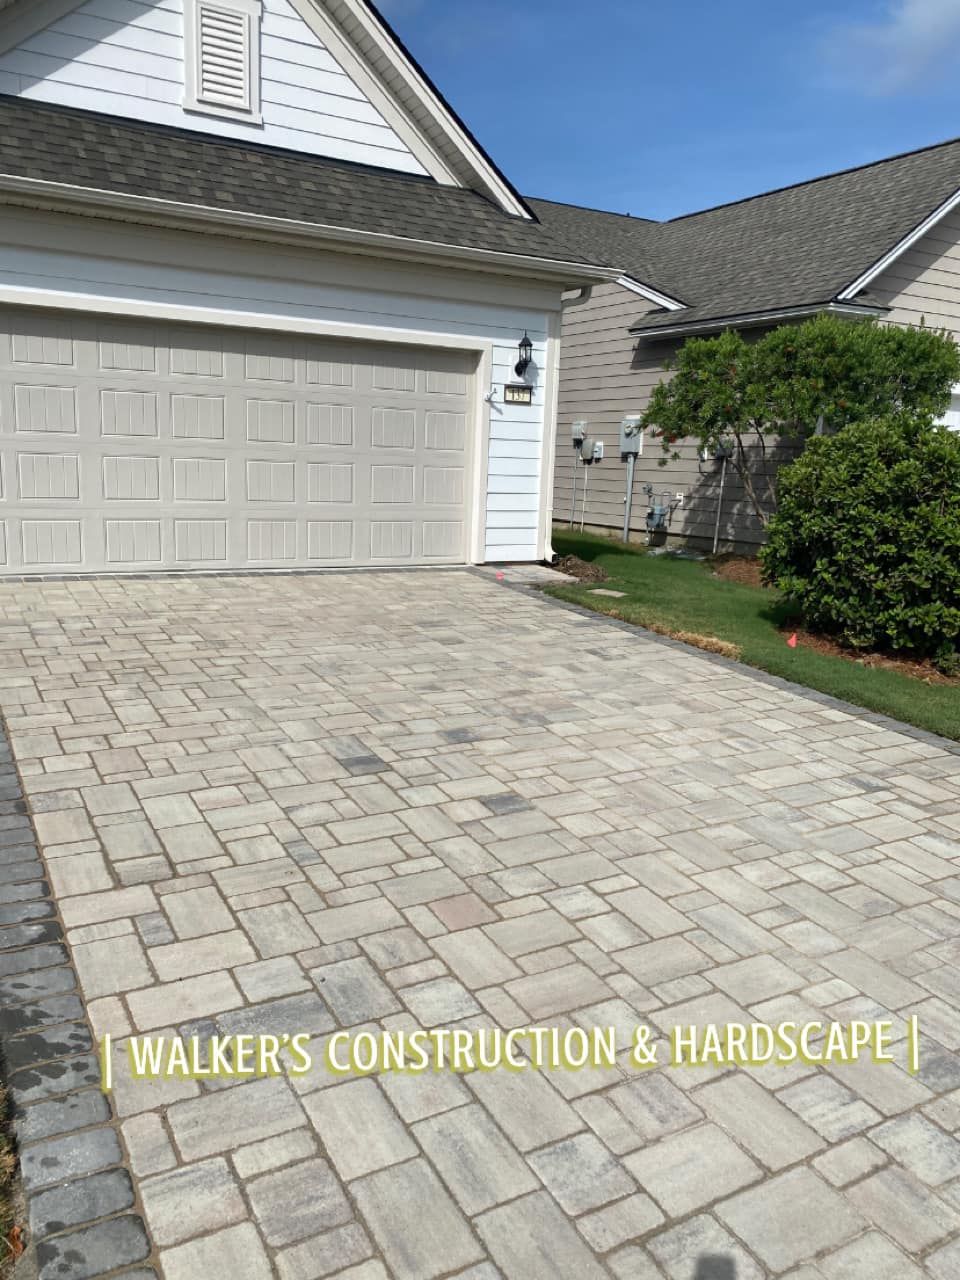 Hardscaping for Walker’s Construction & Hardscape in Bluffton, SC